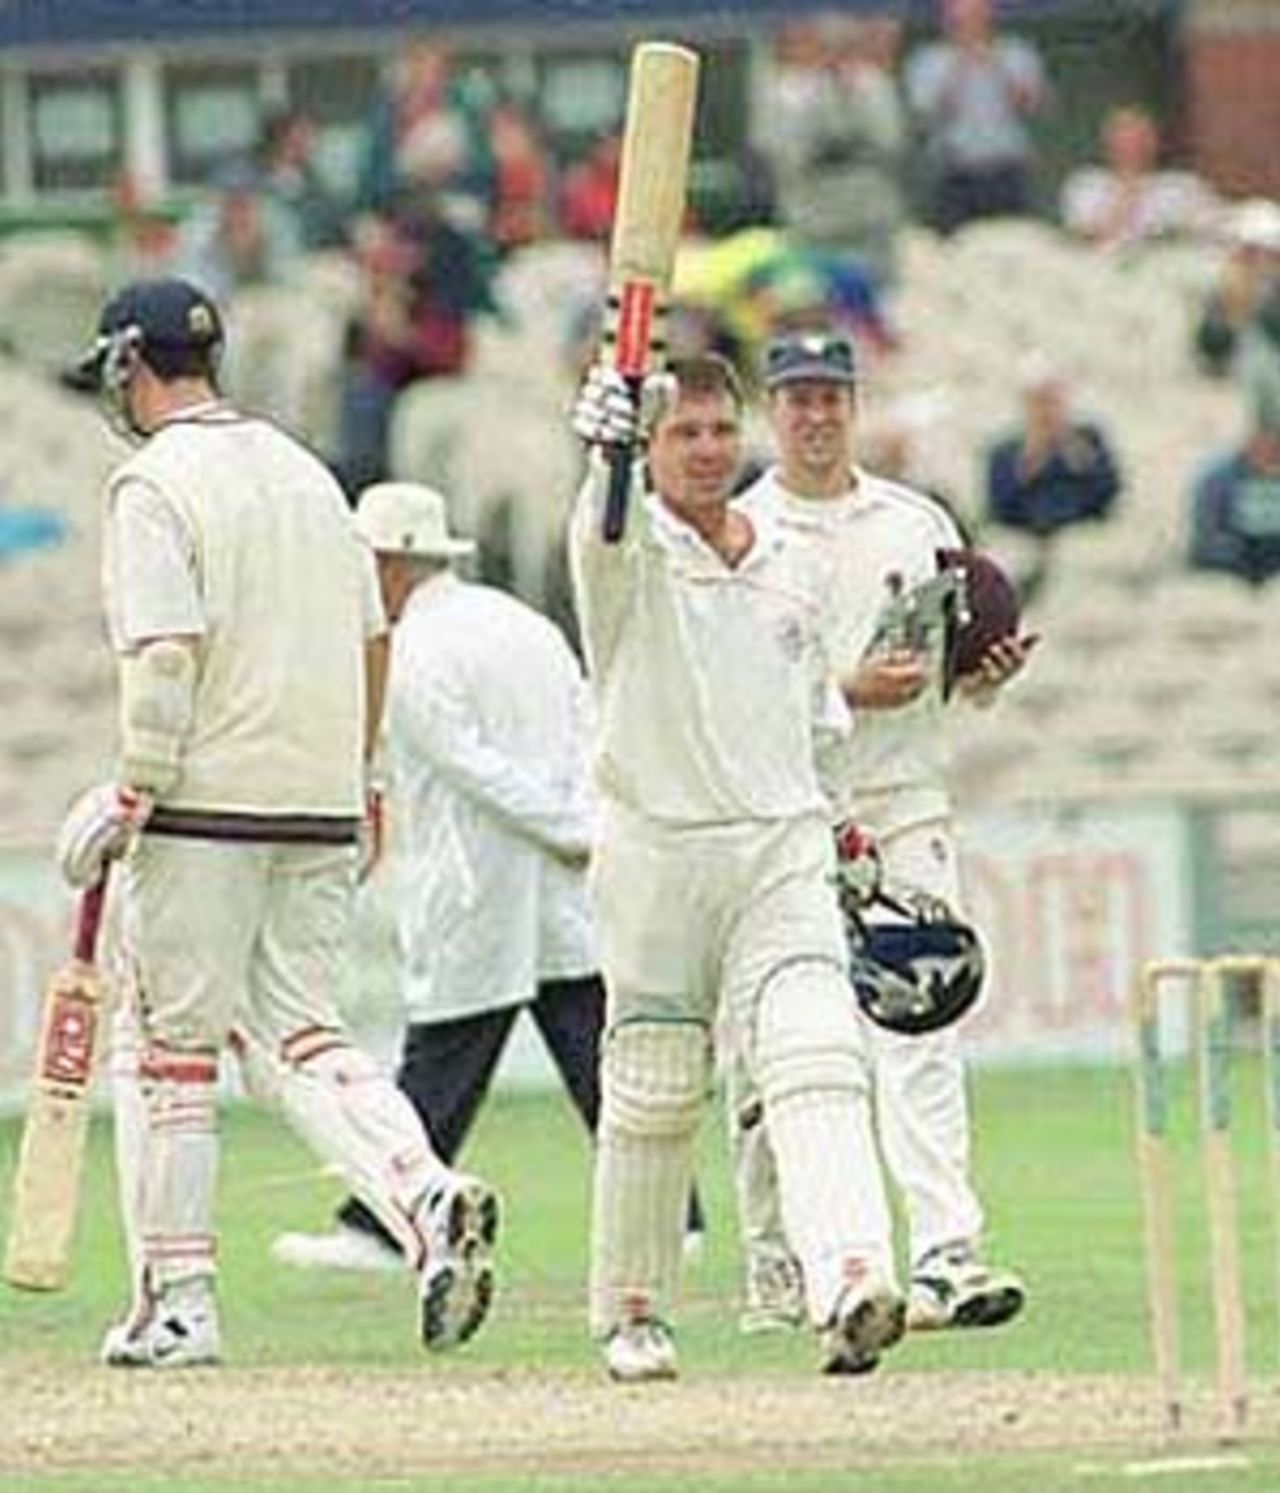 Warren Hegg raises bat in acknowledgement after reaching his 100, PPP healthcare County Championship Division One, 2000, Lancashire v Somerset, Old Trafford, Manchester, 08-10 September 2000 (Day 2).